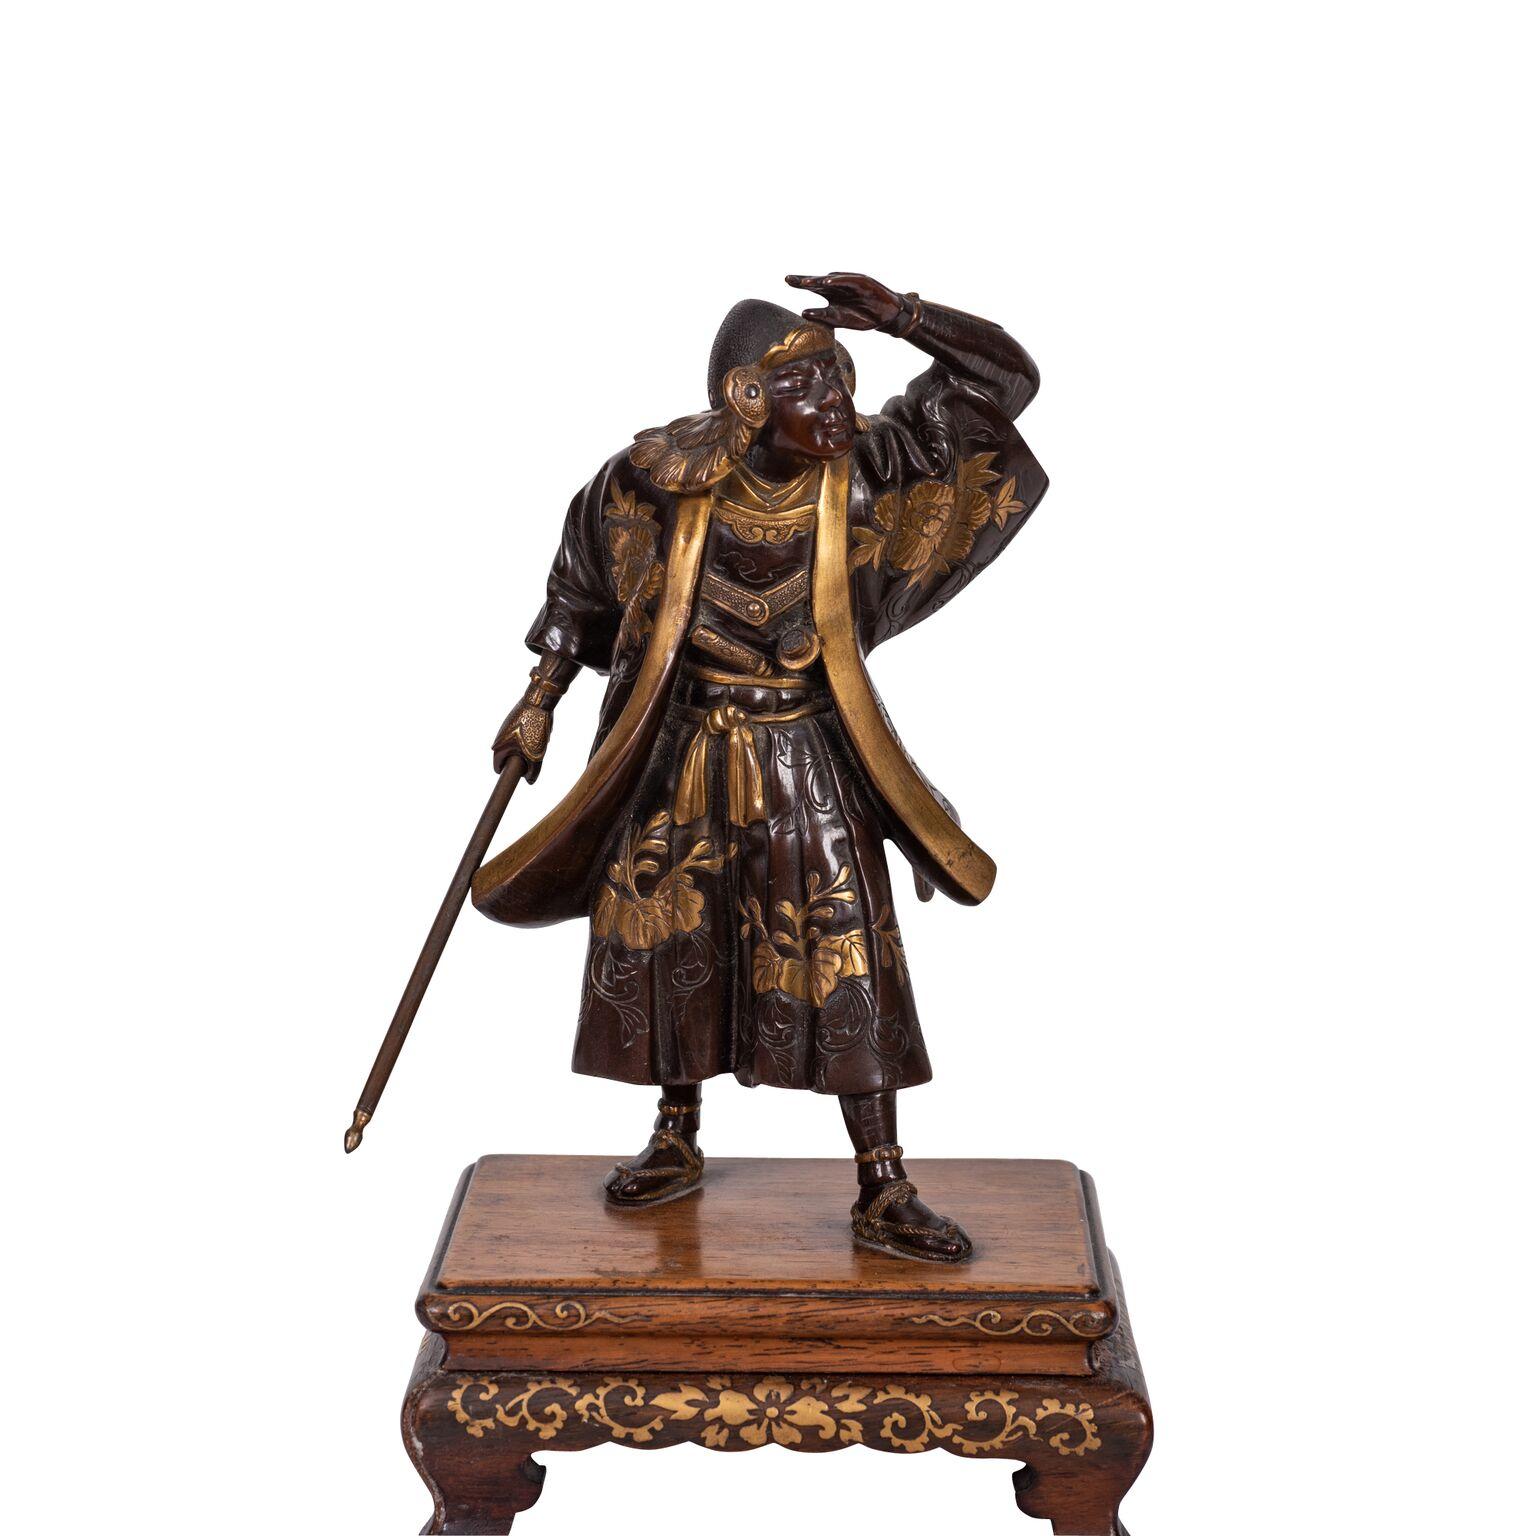 Miyao patinated bronze model of a Samurai
Meiji Period (1868-1912),
signed Miayo.
The figure wearing decorated robes, standing with one hand raised looking into the distance, the other hand clasping a spear.
Mounted on a rectangular lacquered